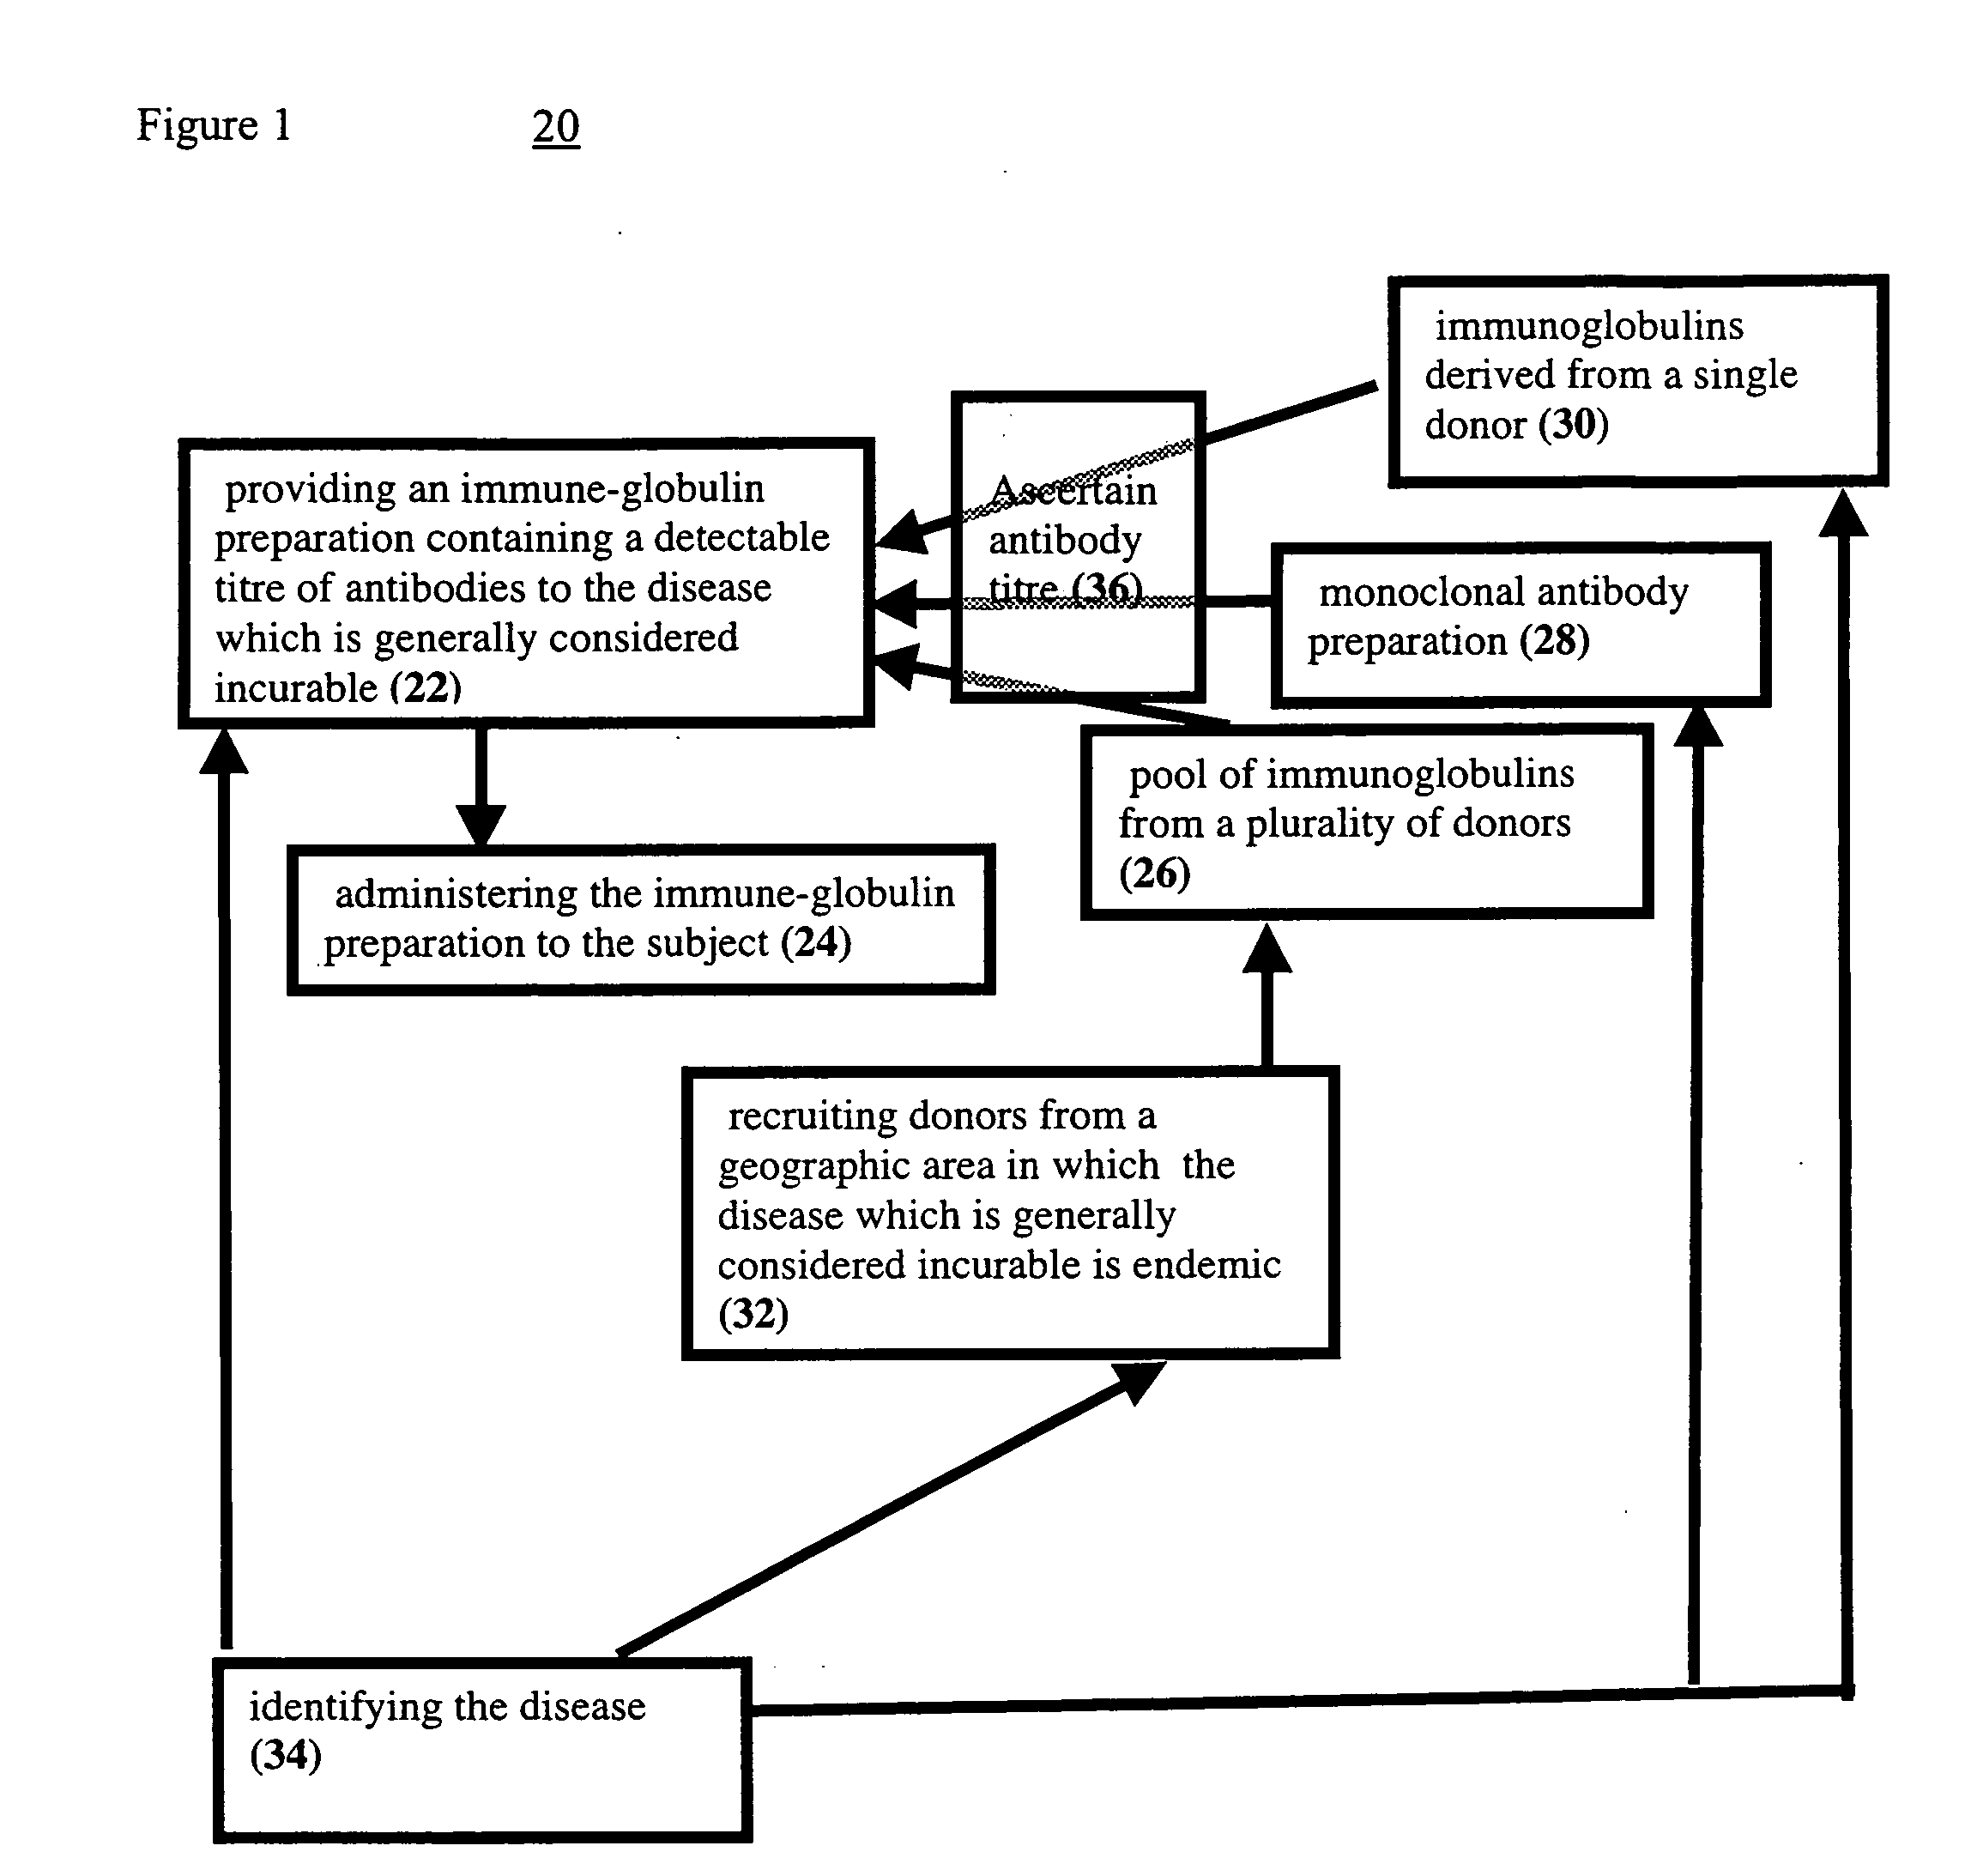 Pharmaceutical compositions and articles of manufacture useful in reversal of a clinical epiosode of an incurable disease and methods of use thereof